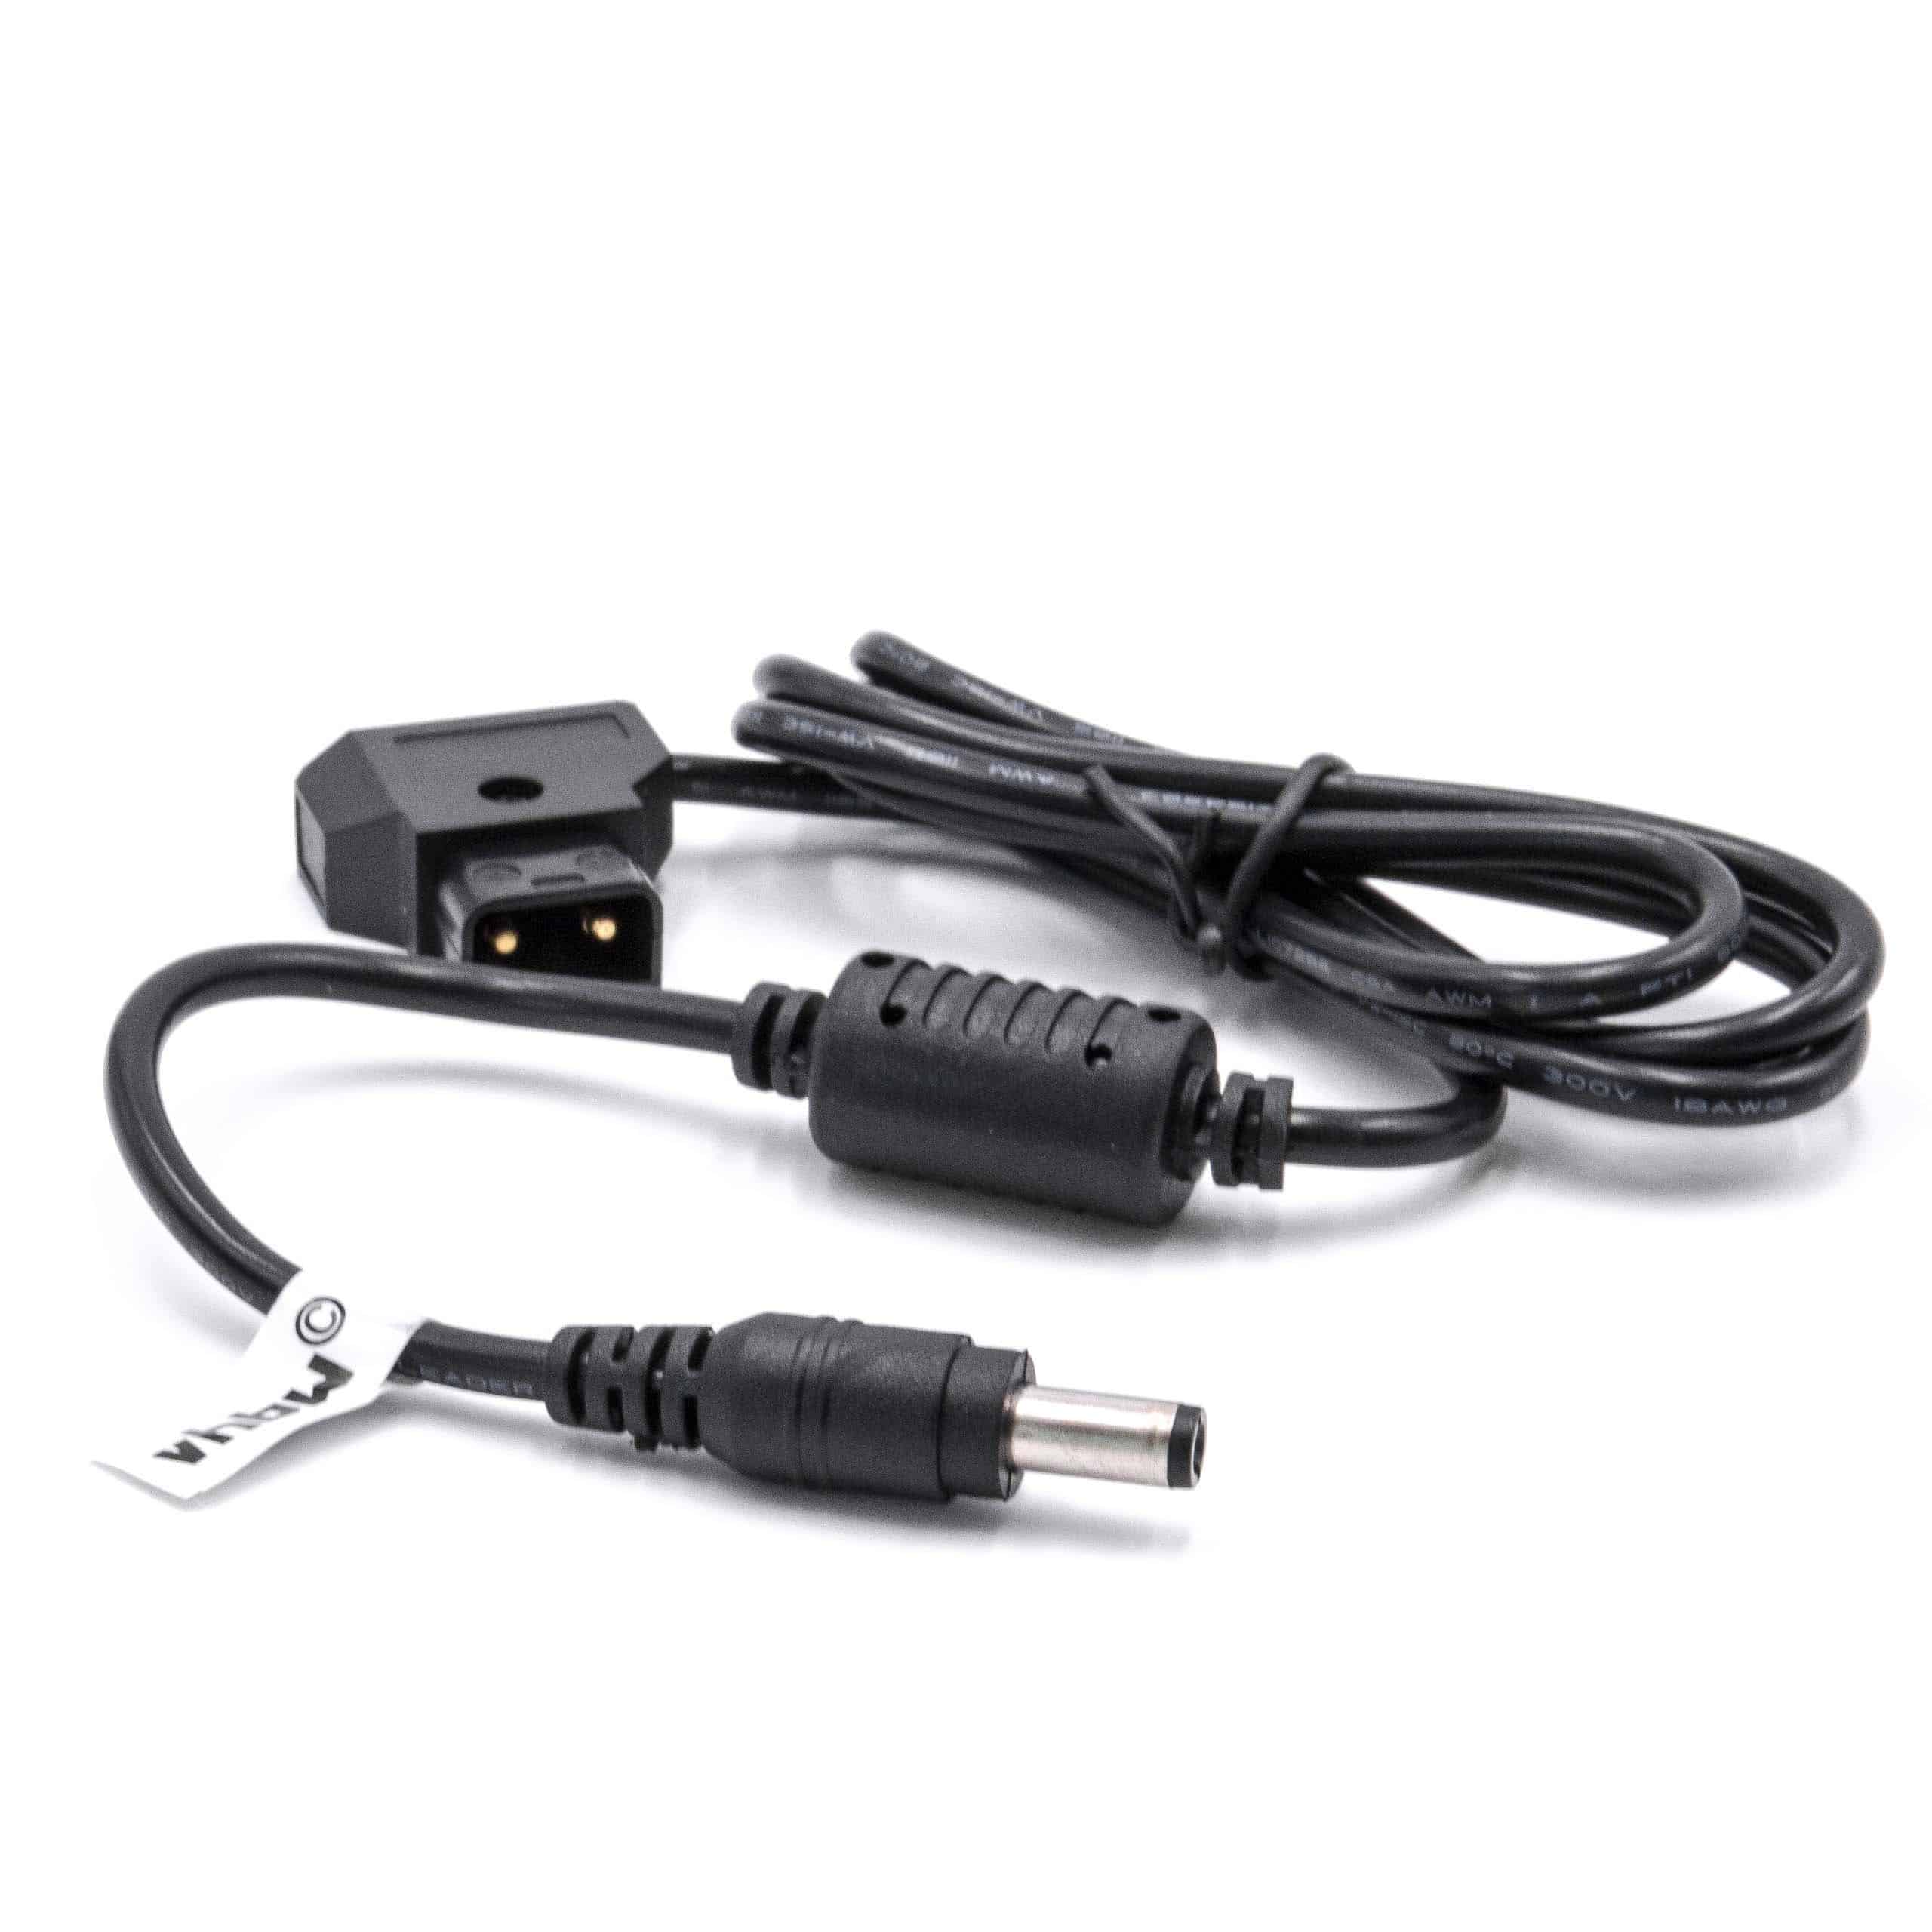 Adapter Cable D-Tap (male) to LED Power Supply suitable for Anton Bauer D-Tap, Dionic Camera - 1 m Black